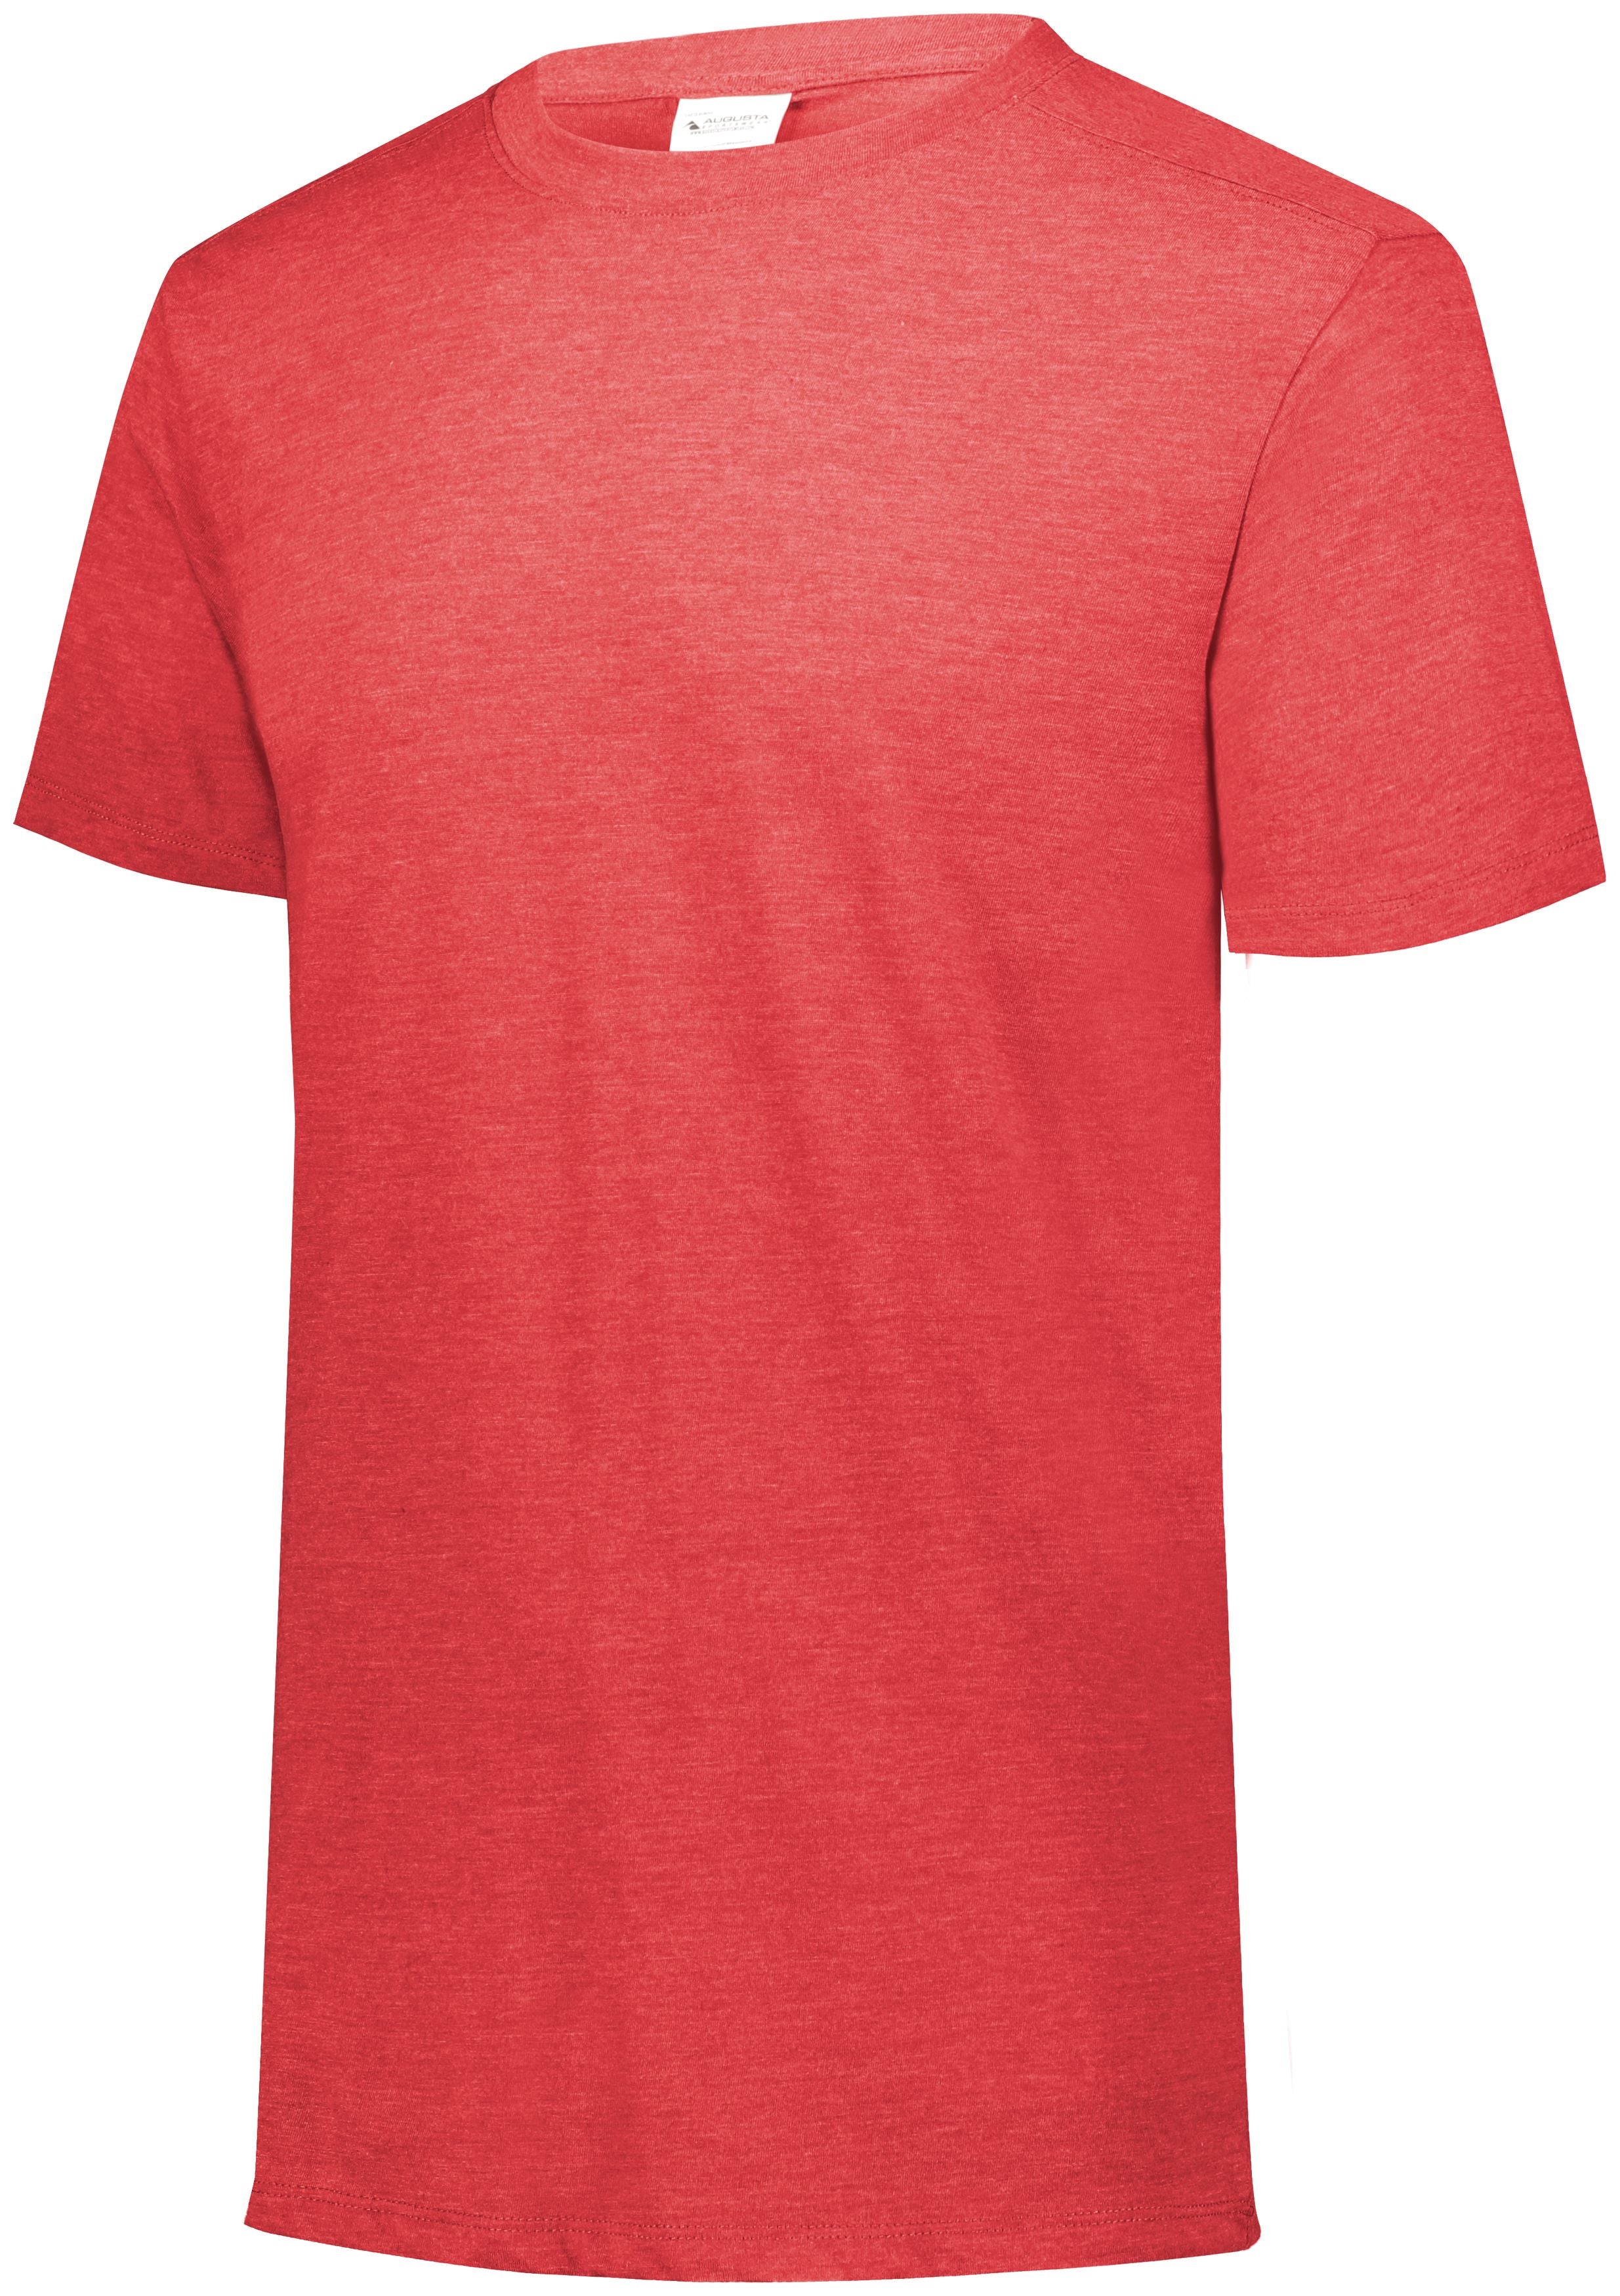 Augusta Sportswear Tri-Blend T-Shirt in Red Heather  -Part of the Adult, Adult-Tee-Shirt, T-Shirts, Augusta-Products, Shirts product lines at KanaleyCreations.com